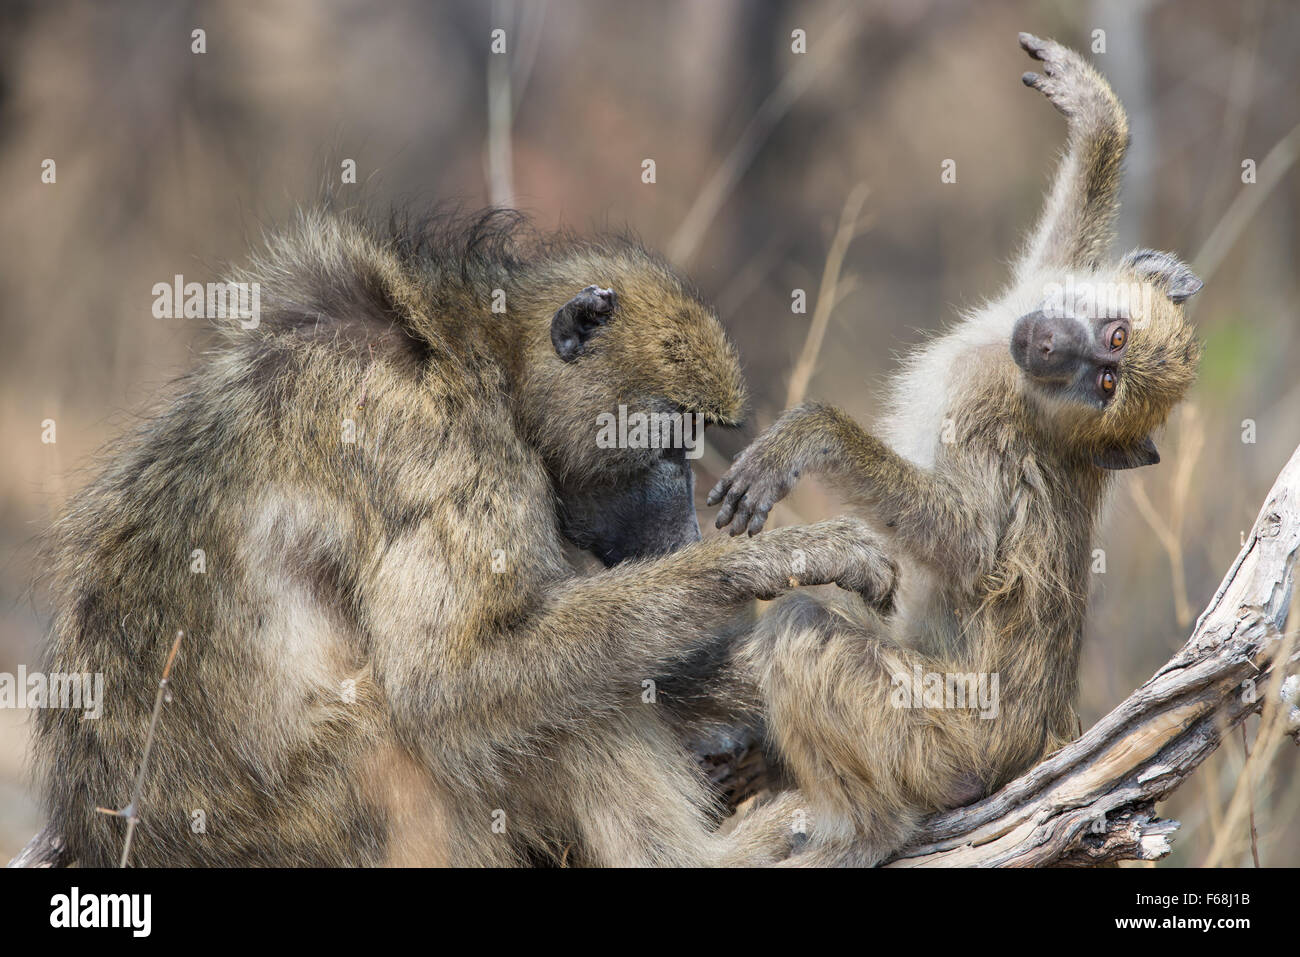 Mother baboon grooming her baby in Moremi National park, Botswana. Stock Photo